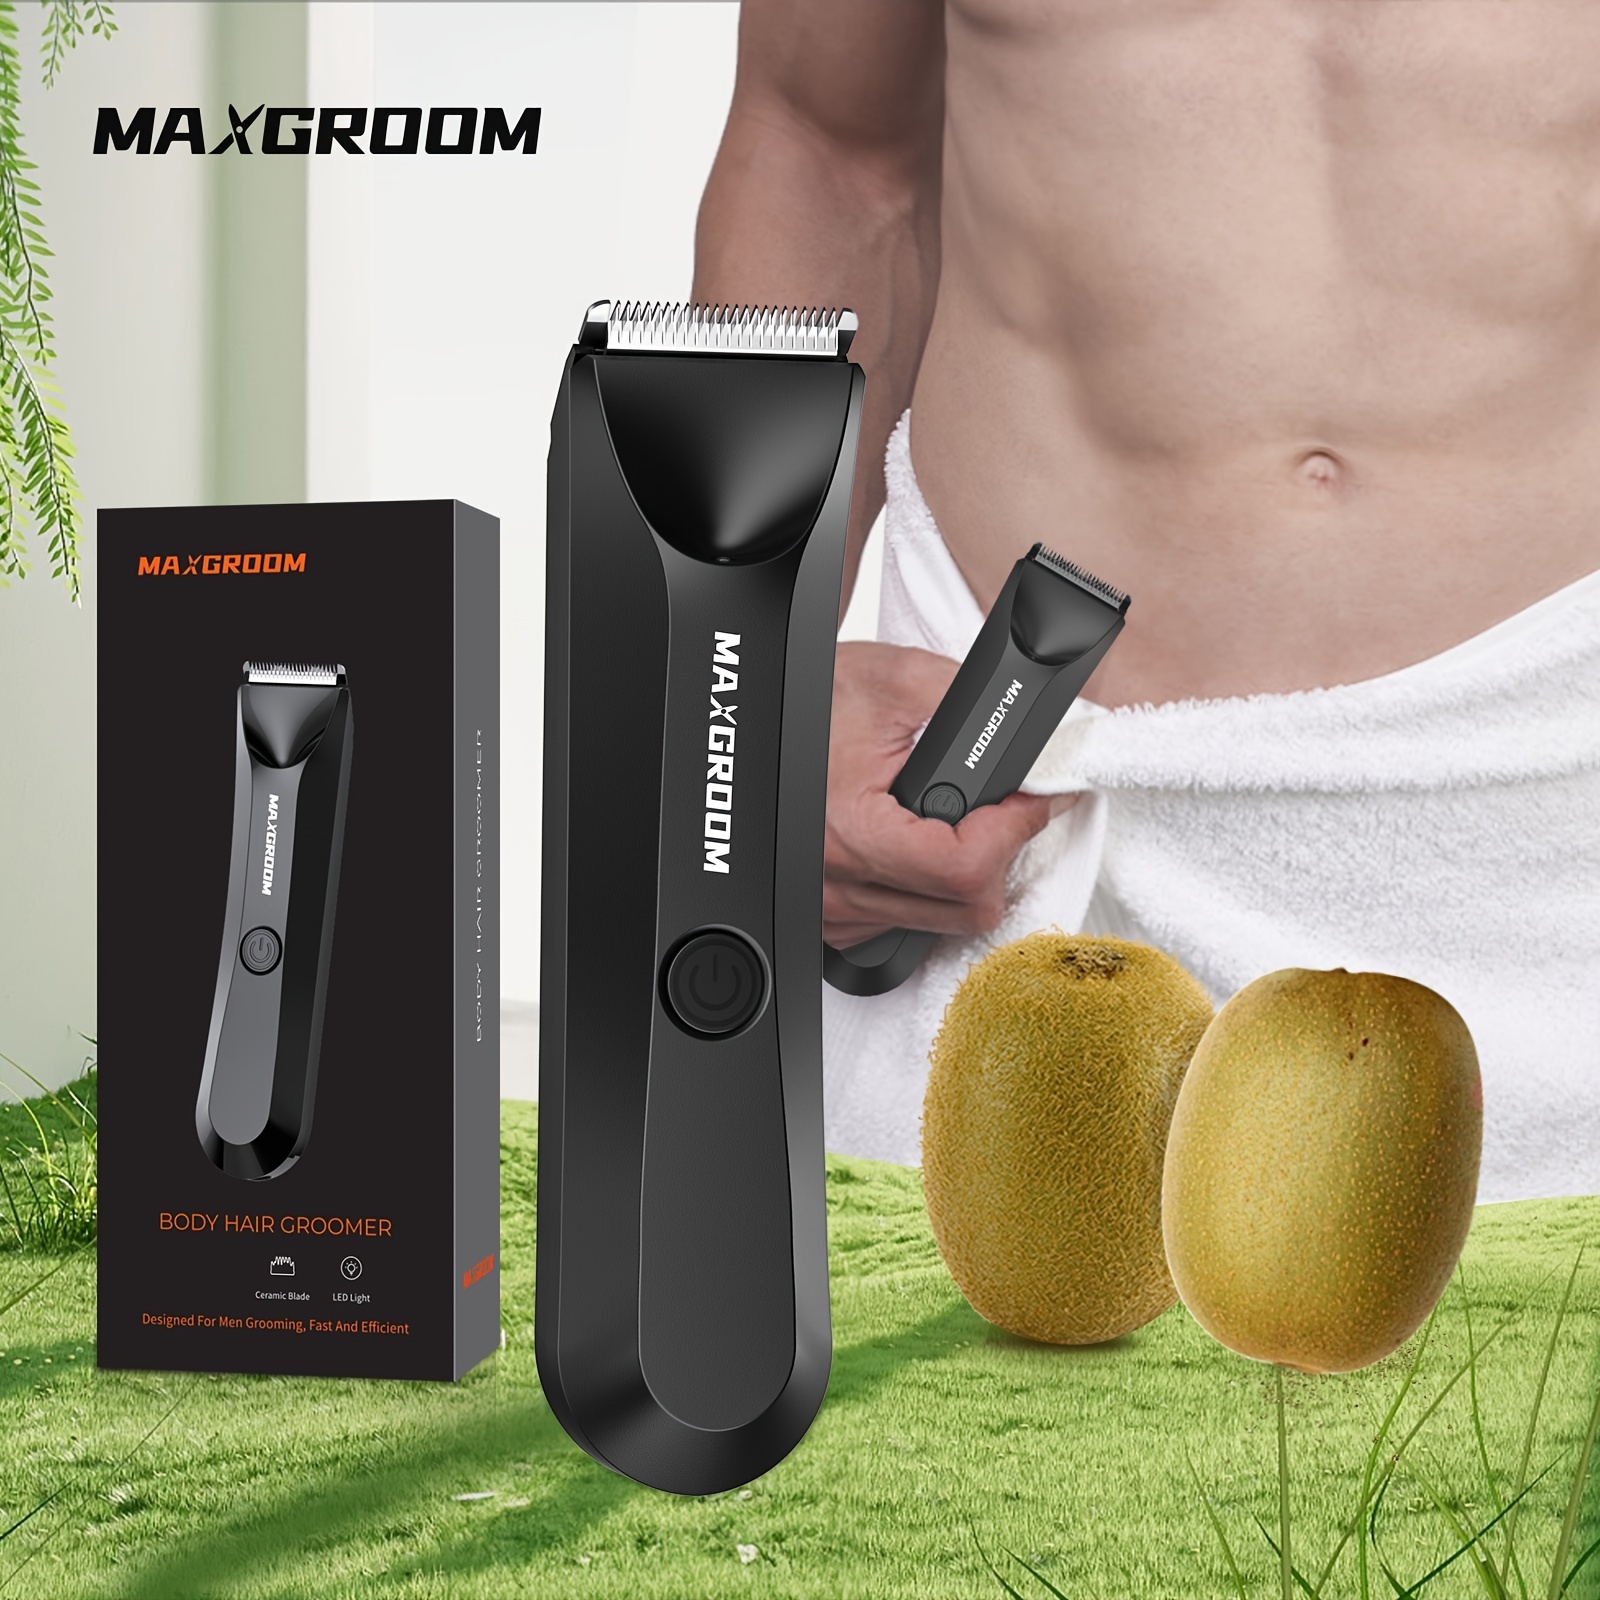 

Maxgroom Body Hair Trimmer For Men Pubic Hair Shaver Electric Groomer Hair Trimmer With Led Lighting Body Grooming M-9087